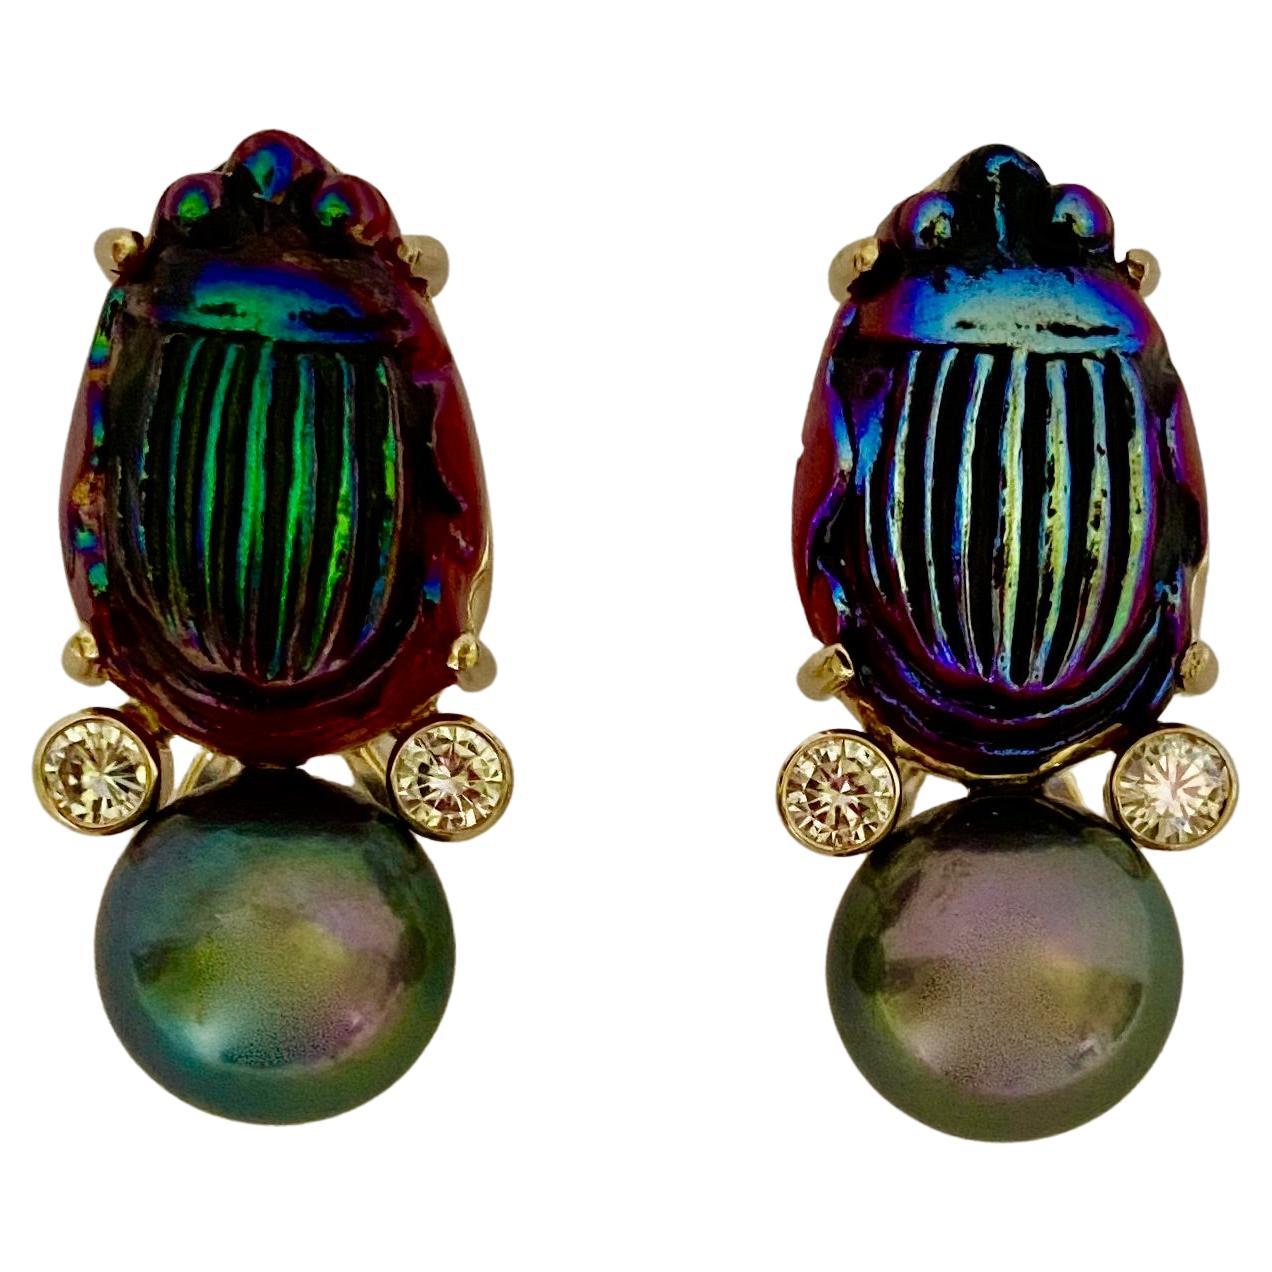 A pair of antique Louis Comfort Tiffany Favrile glass scarabs are featured in these dramatic drop earrings.  The beautifully detailed scarabs possess a lustrous rainbow-like play of colors typically found in Tiffany glass.  Those colors are picked